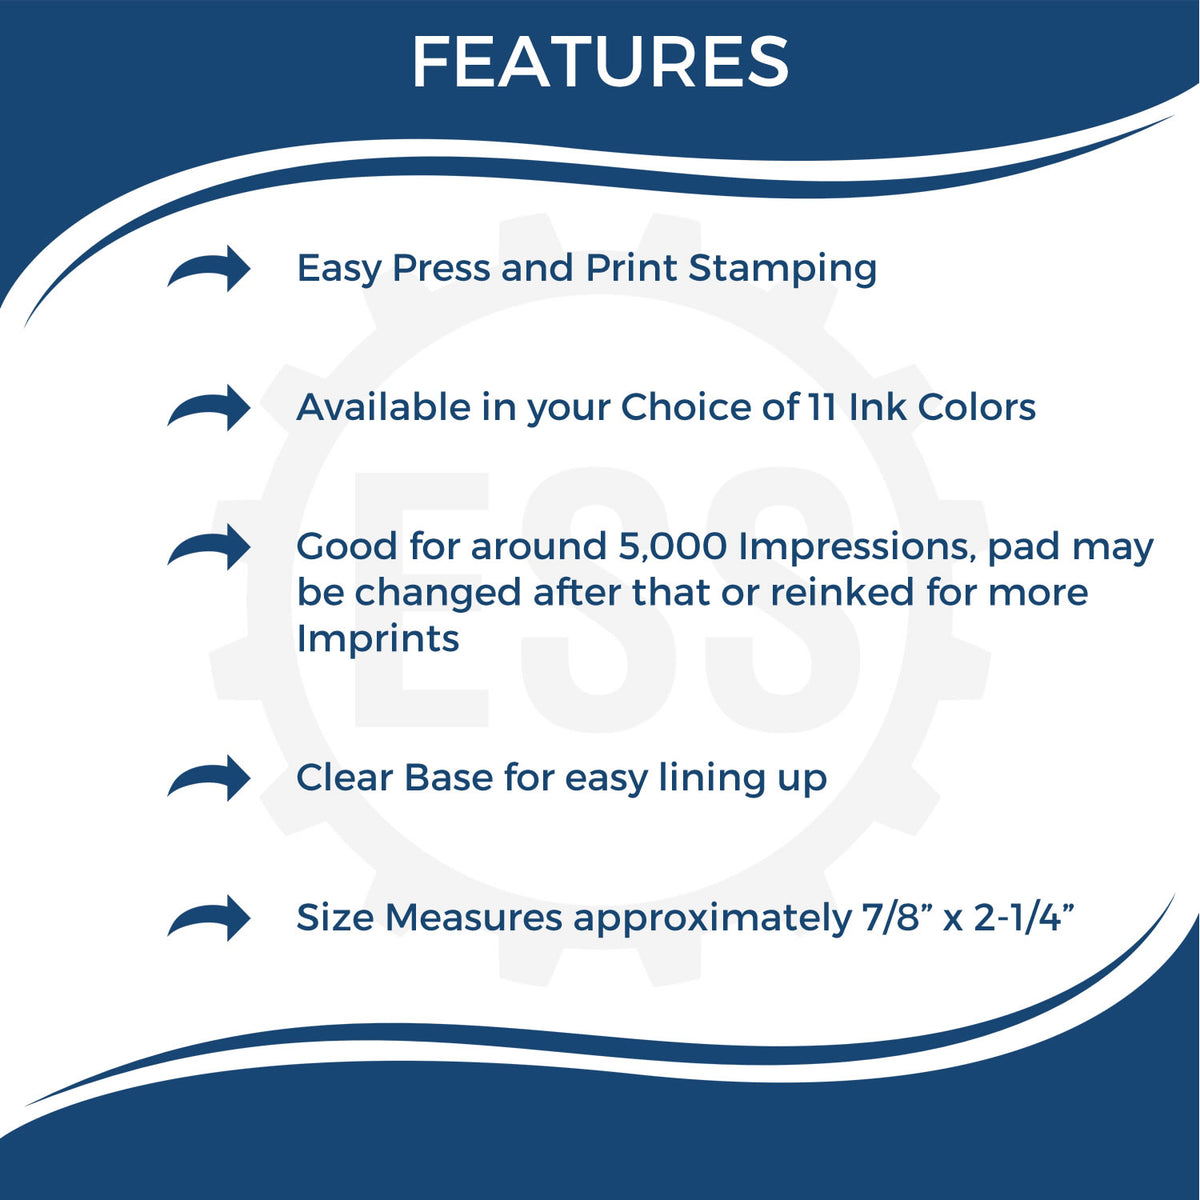 Large Self-Inking Copia Stamp